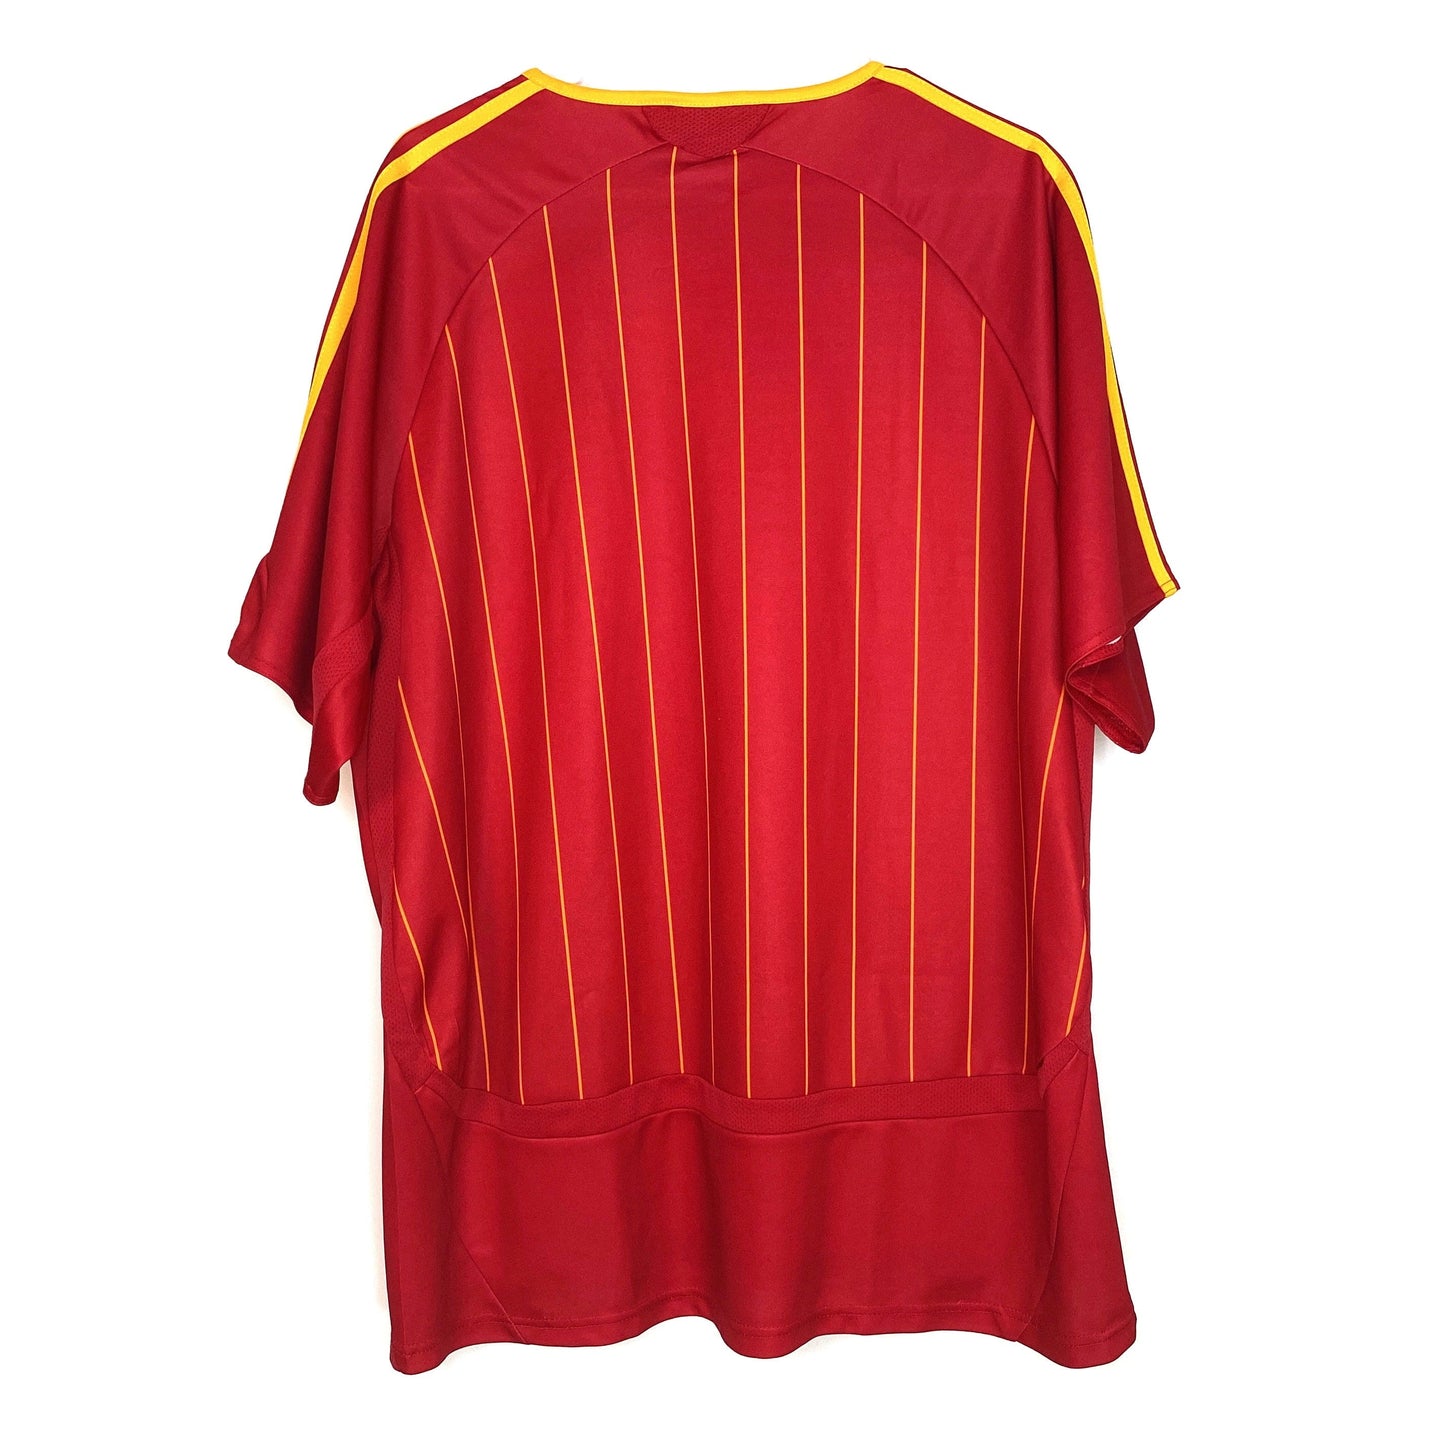 Premeril Football League Mens Size XXL Red Striped T-Shirt Striped Soccer Spanish National S/s